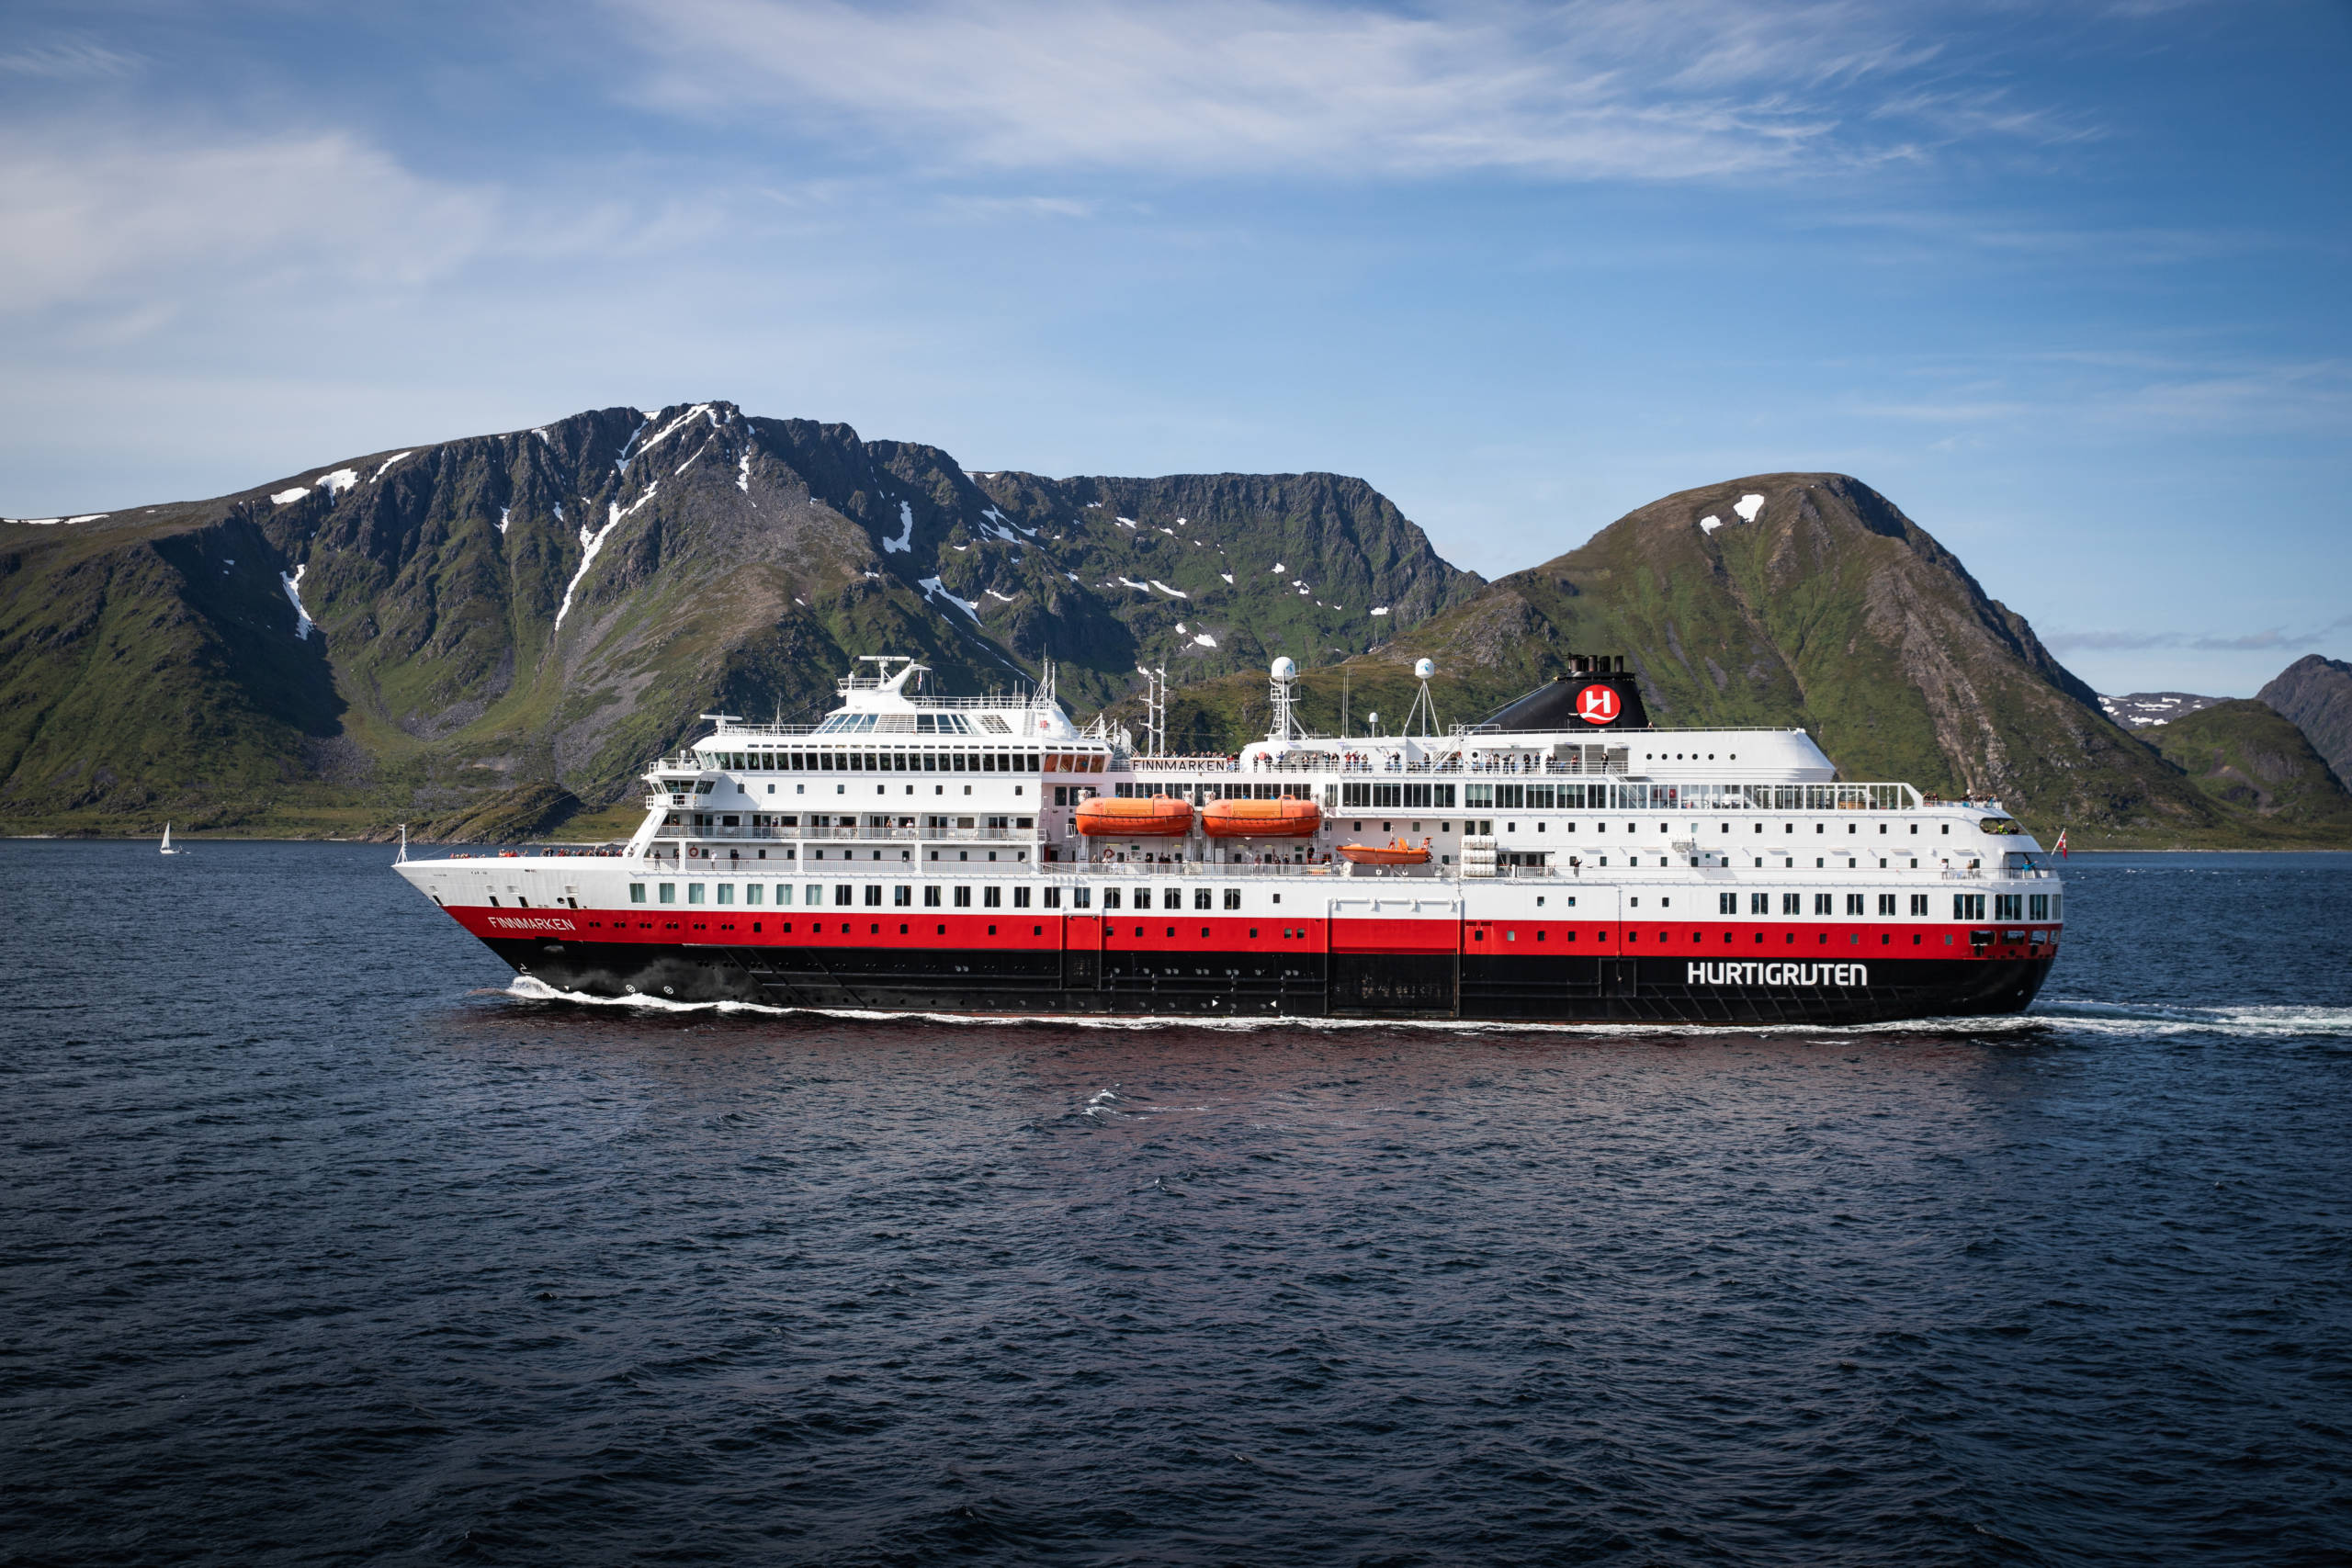 Norway just became the first country to allow ocean cruises to resume